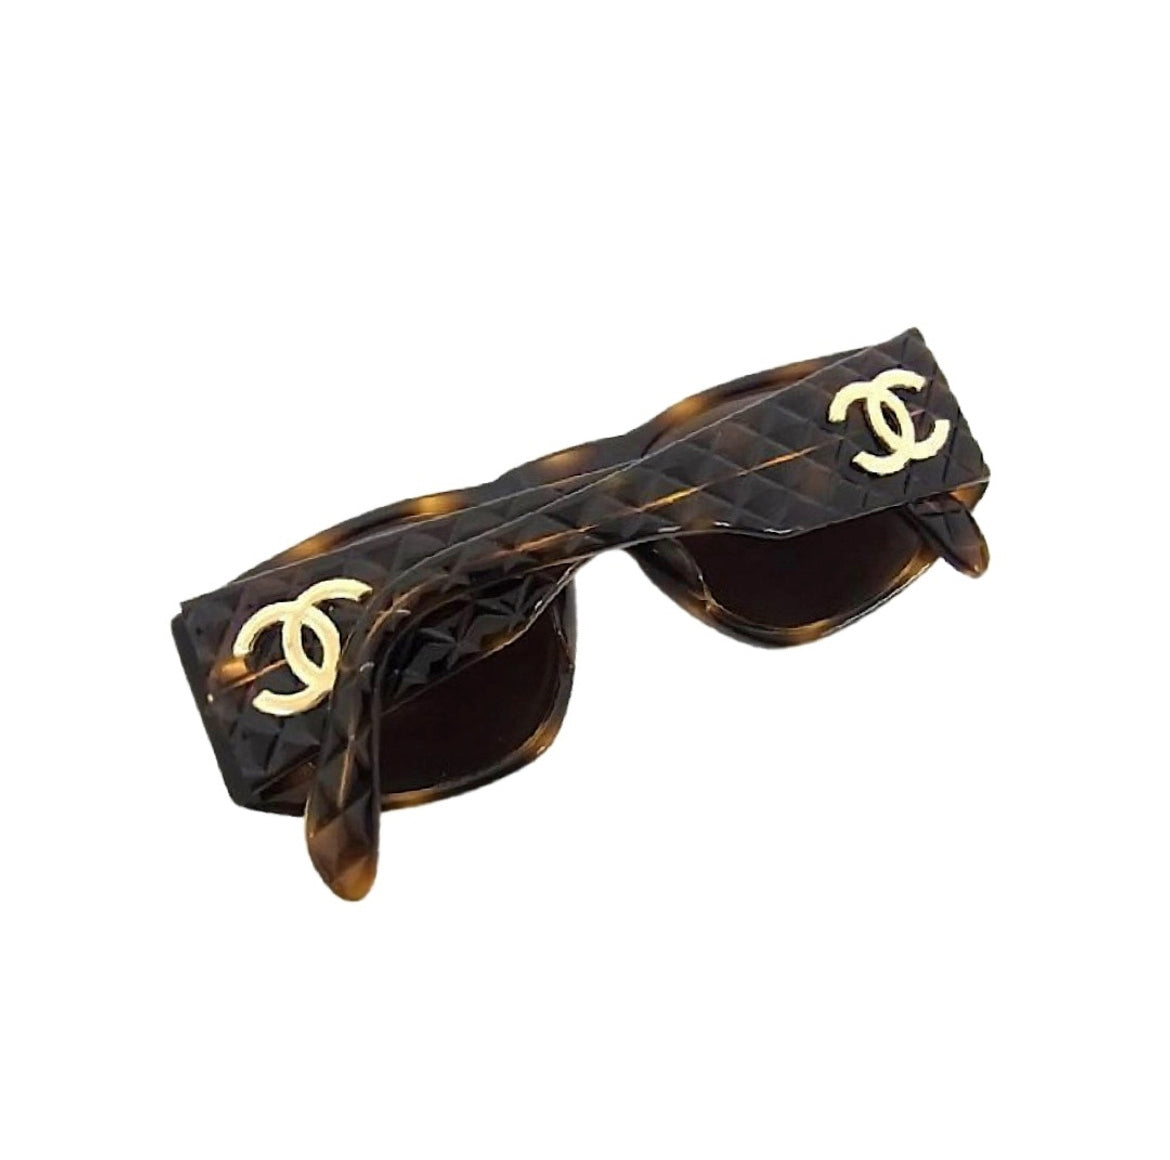 CHANEL Vintage Tortoiseshell Quilted Sunglasses